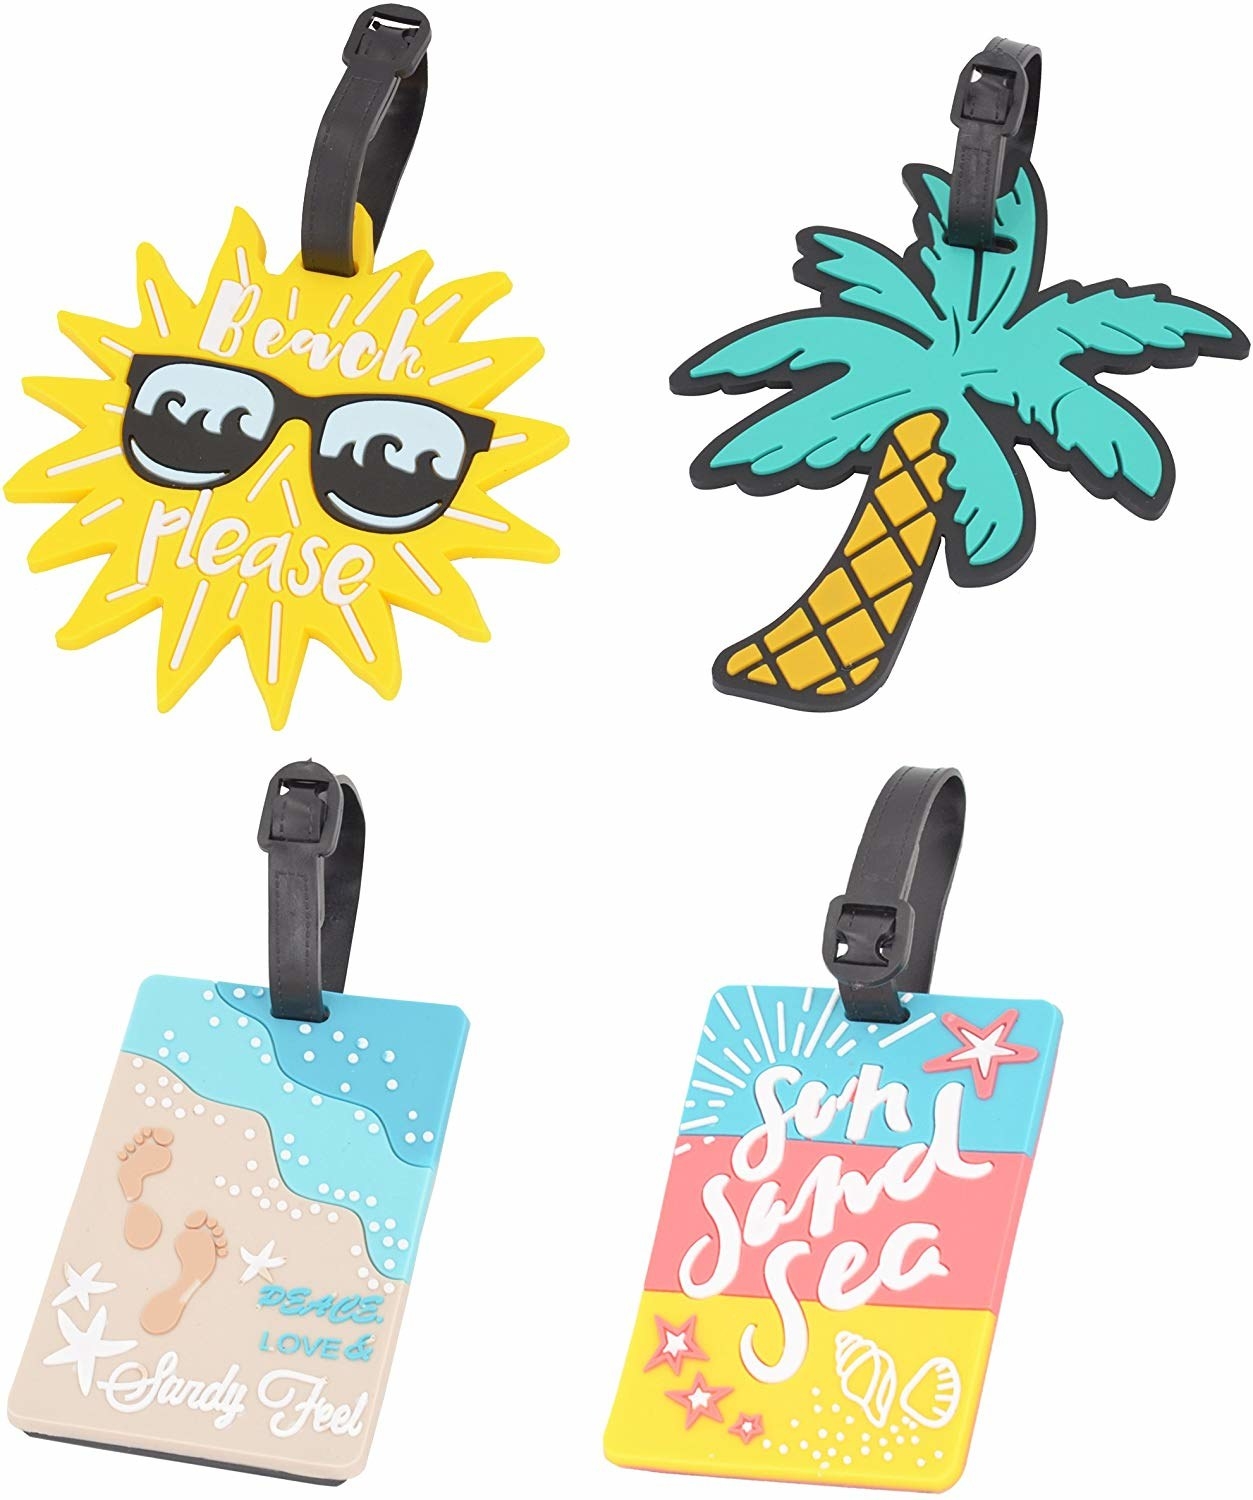 Luggage tags in the shape of a sun and palm tree and two rectangular ones. One depicts a beach and one says &quot;Sun Sand Sea&quot;